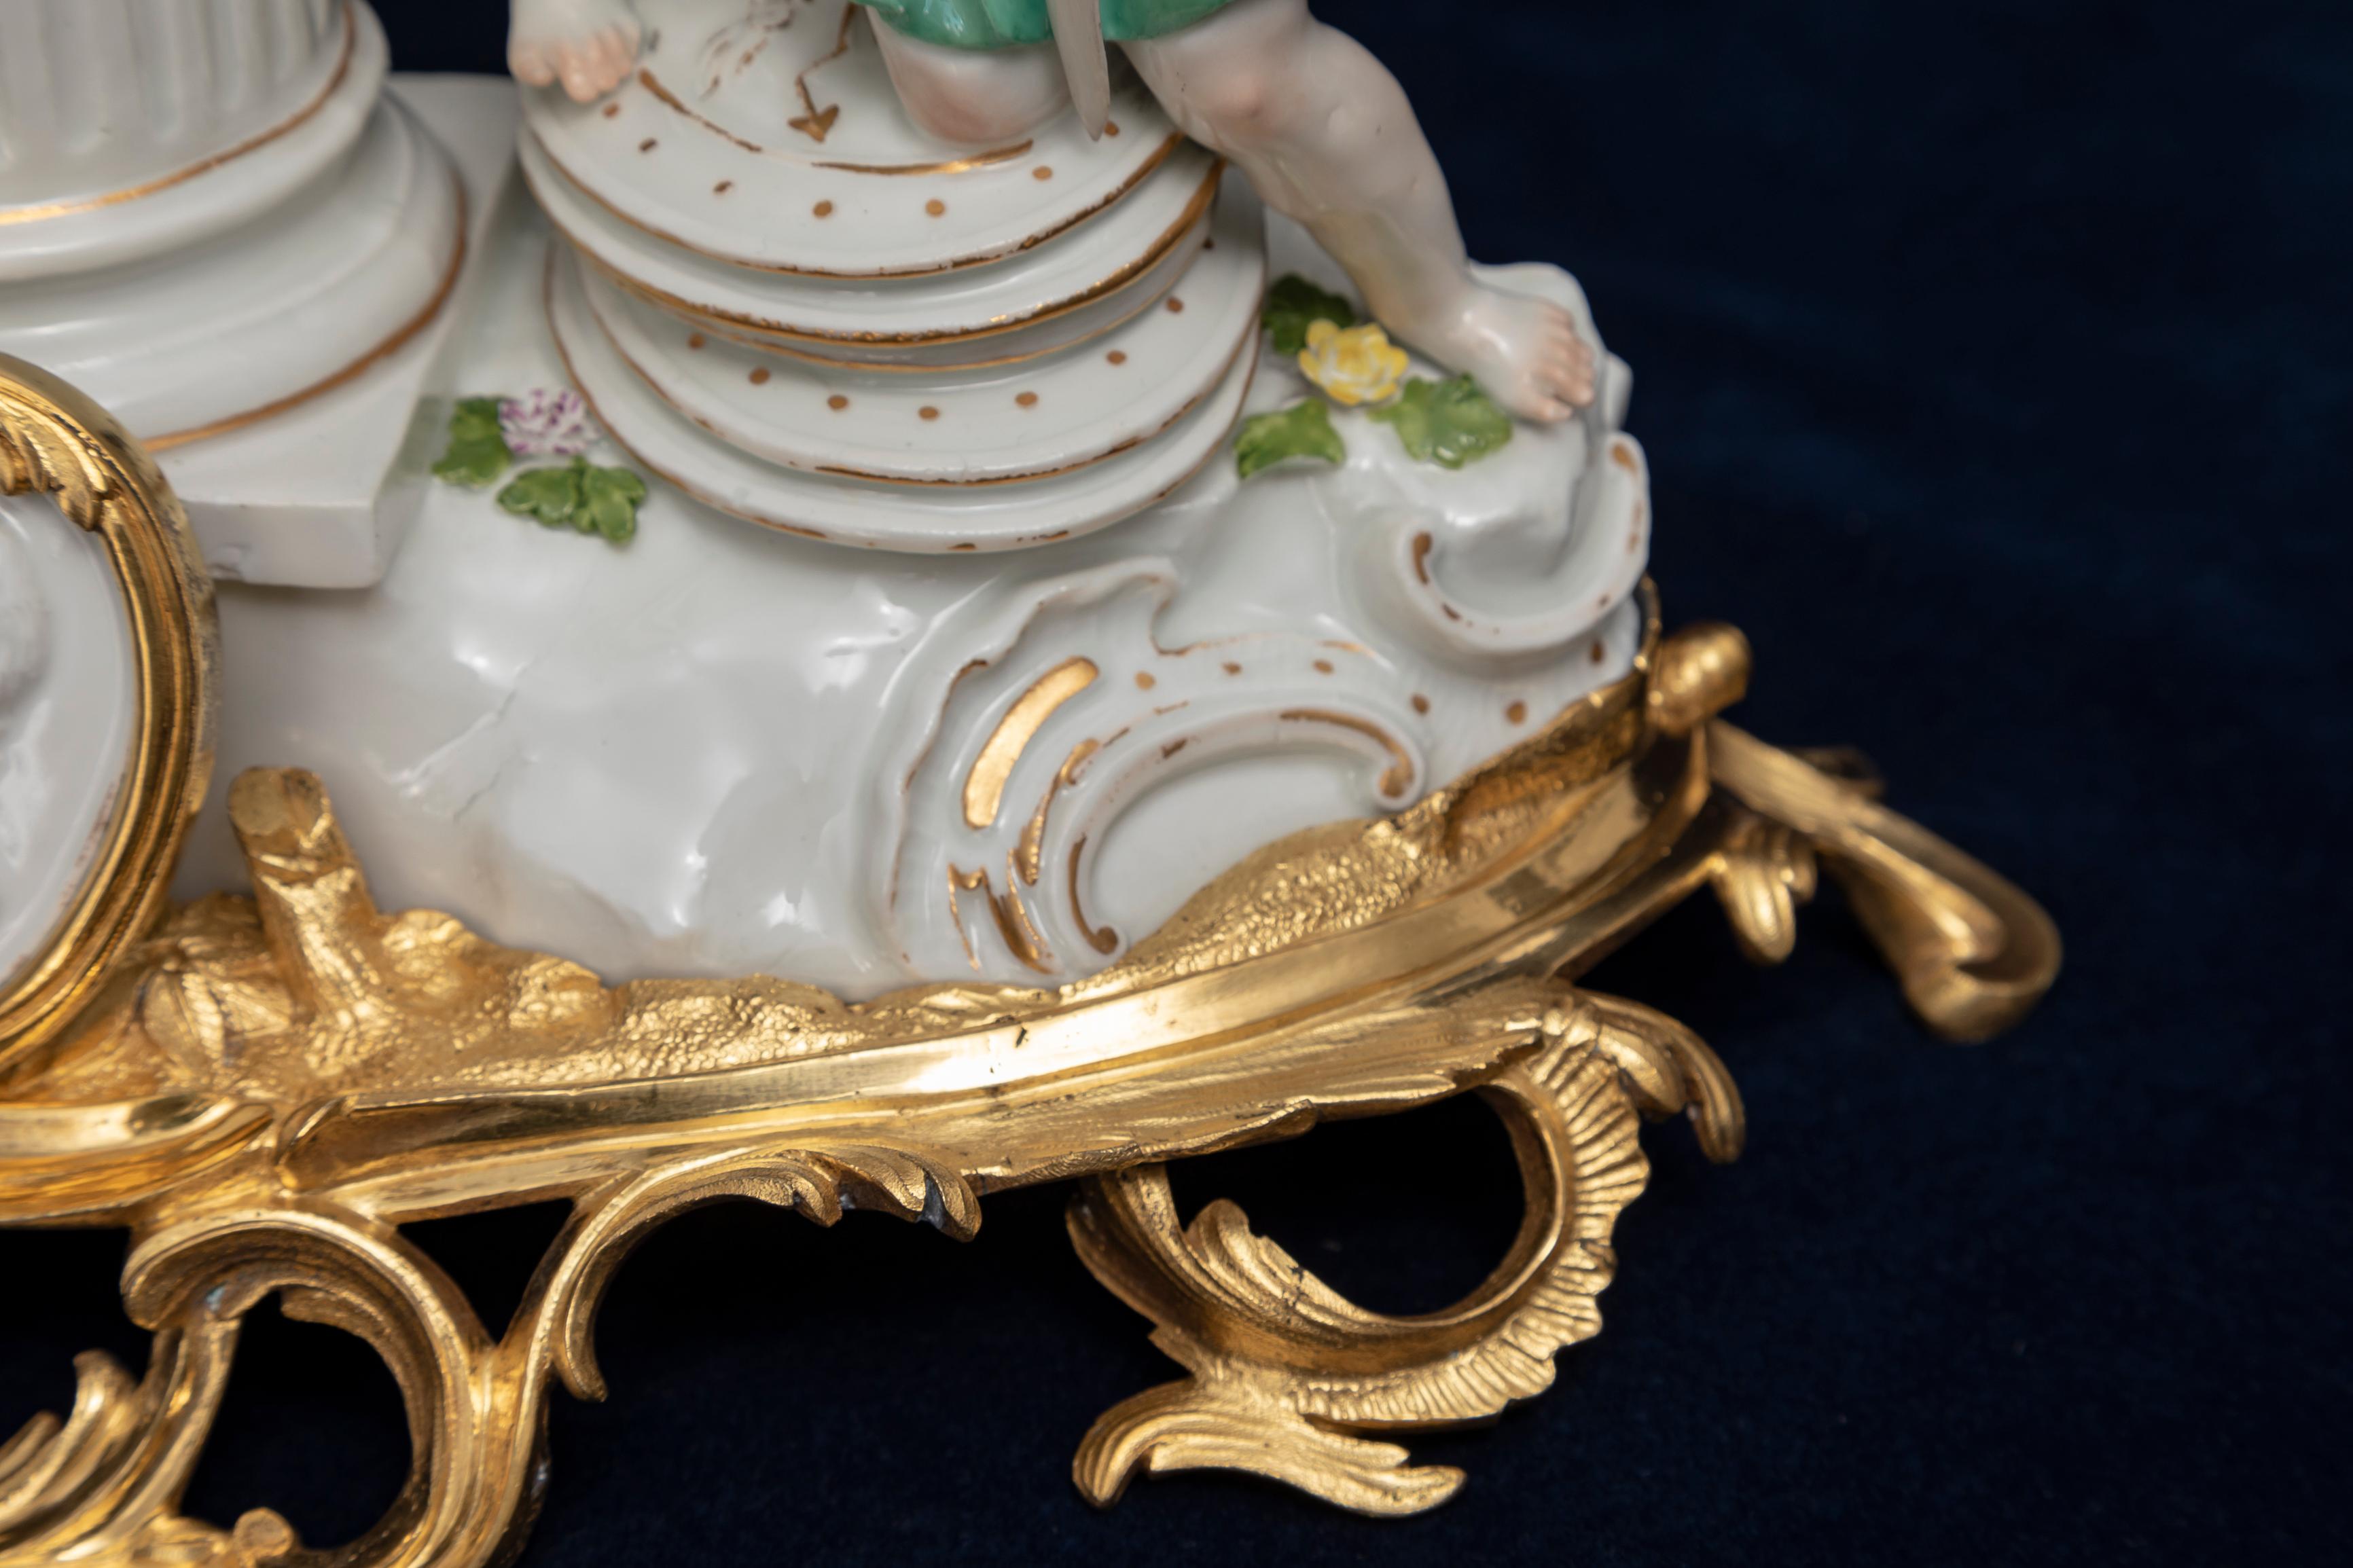 An Important Rare 18th C. Ormolu Mounted Meissen Porcelain Putti Clock Grouping For Sale 8